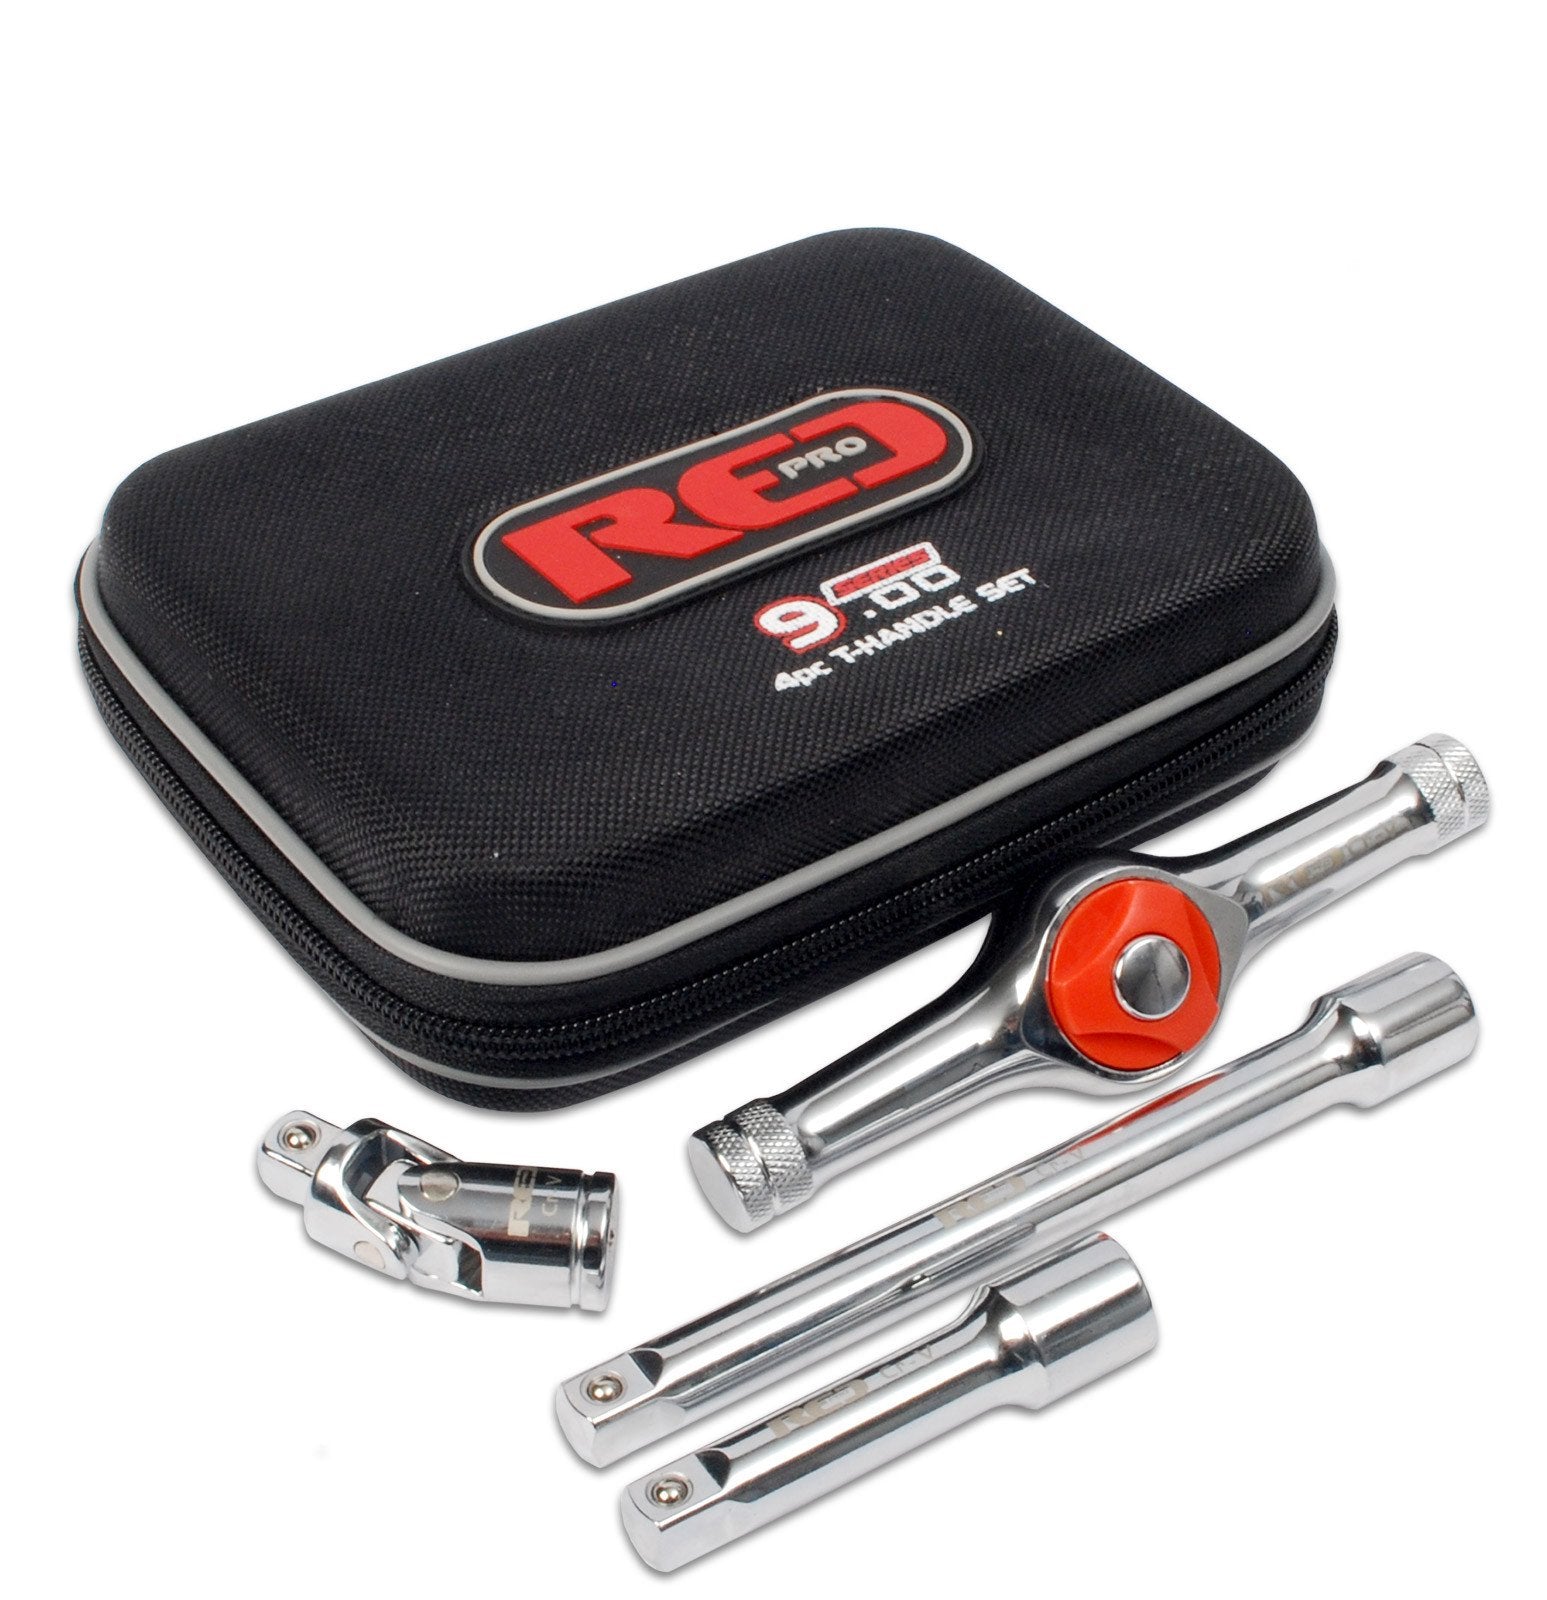 4pc T-Handle Set 3/8" Drive made by Red Pro Tools, sold by In-Excess Ltd